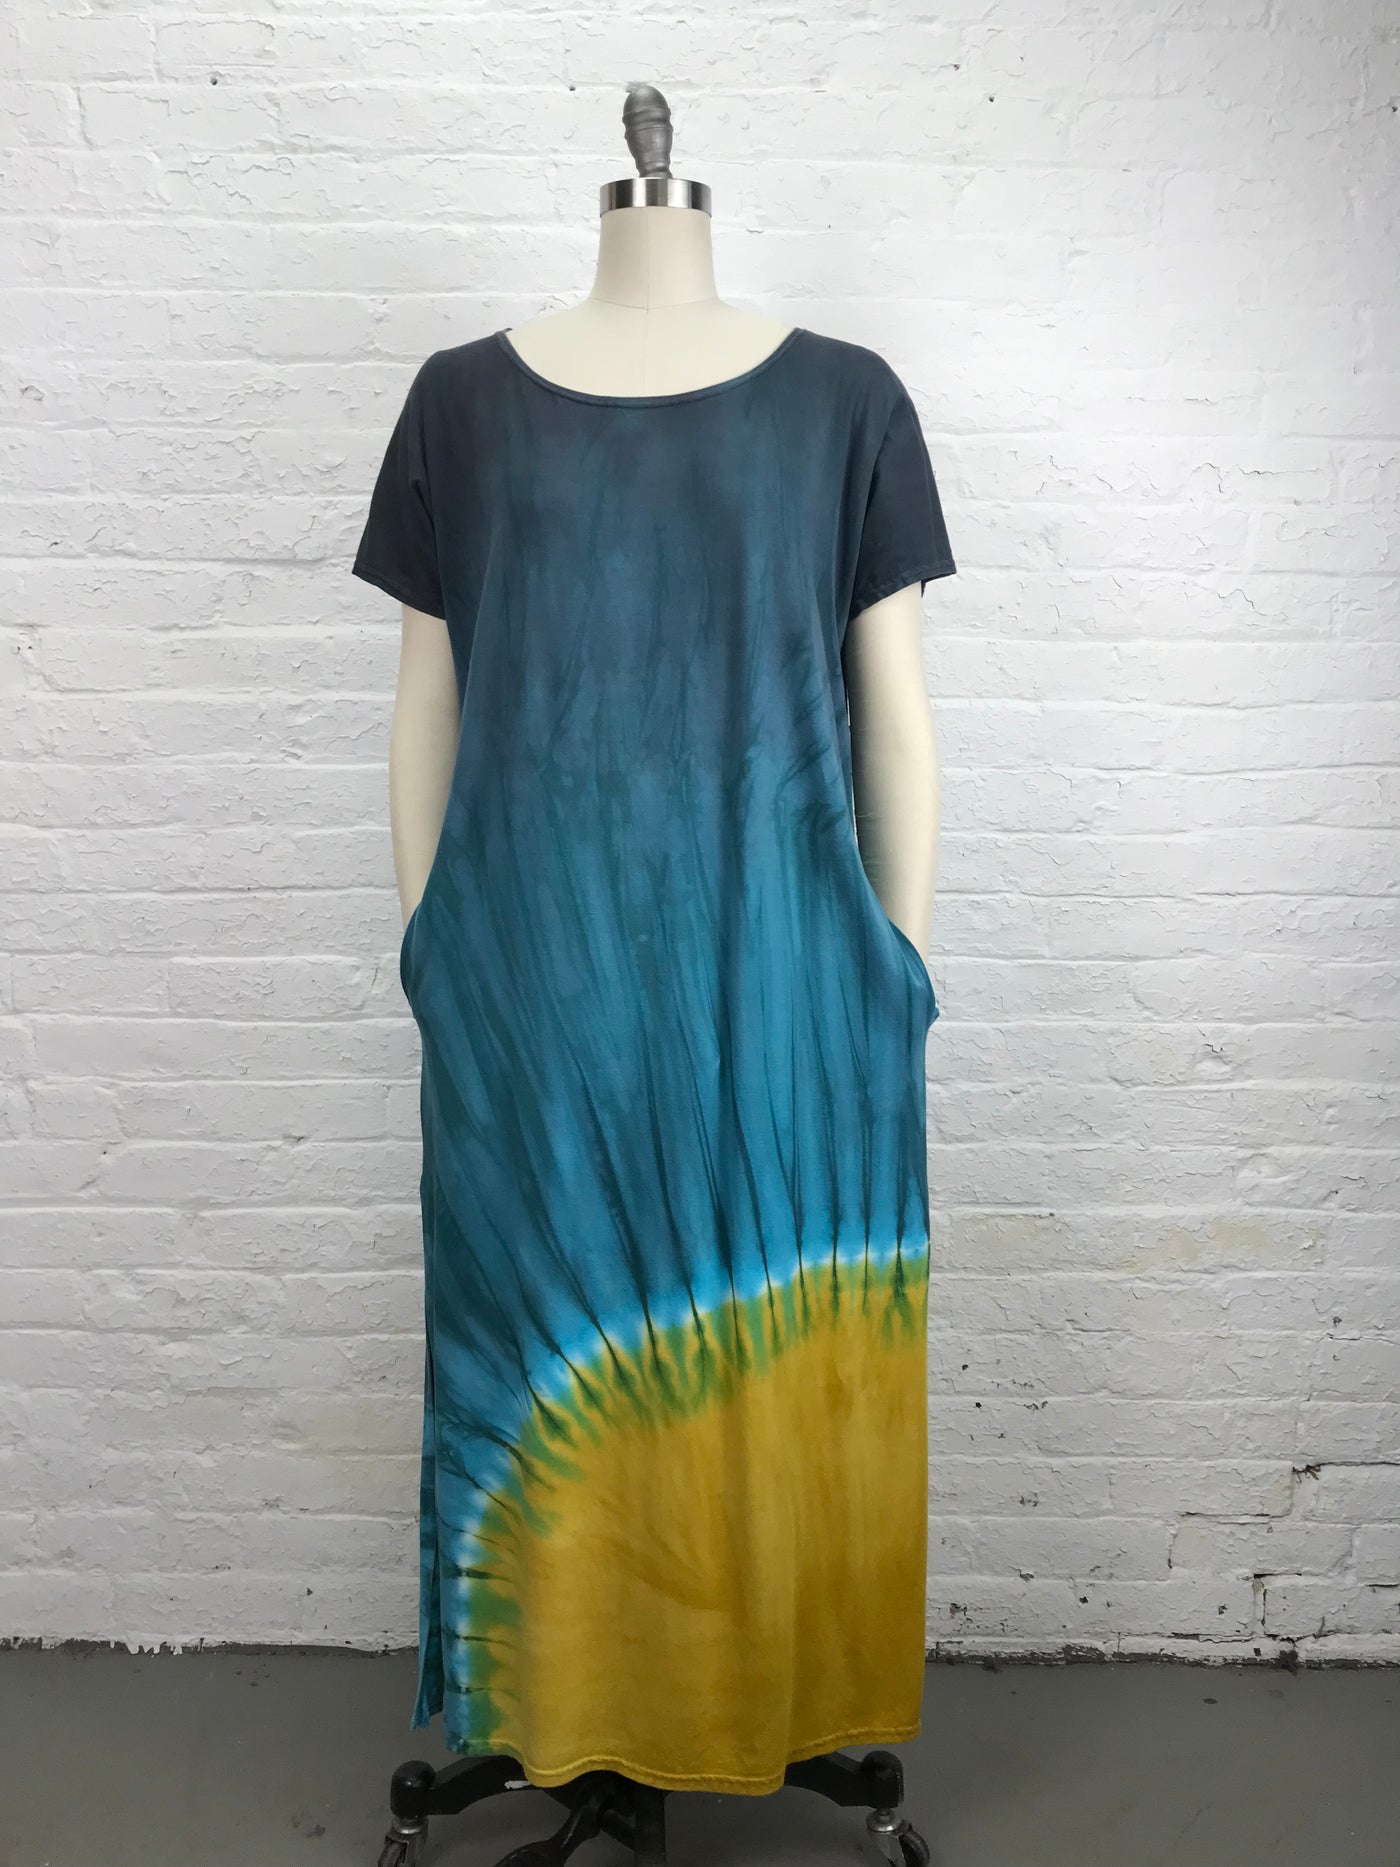 The Astrid Maxi Dress in Sunshine is hand dyed in a brightly patterned in gold and turquoise ombre